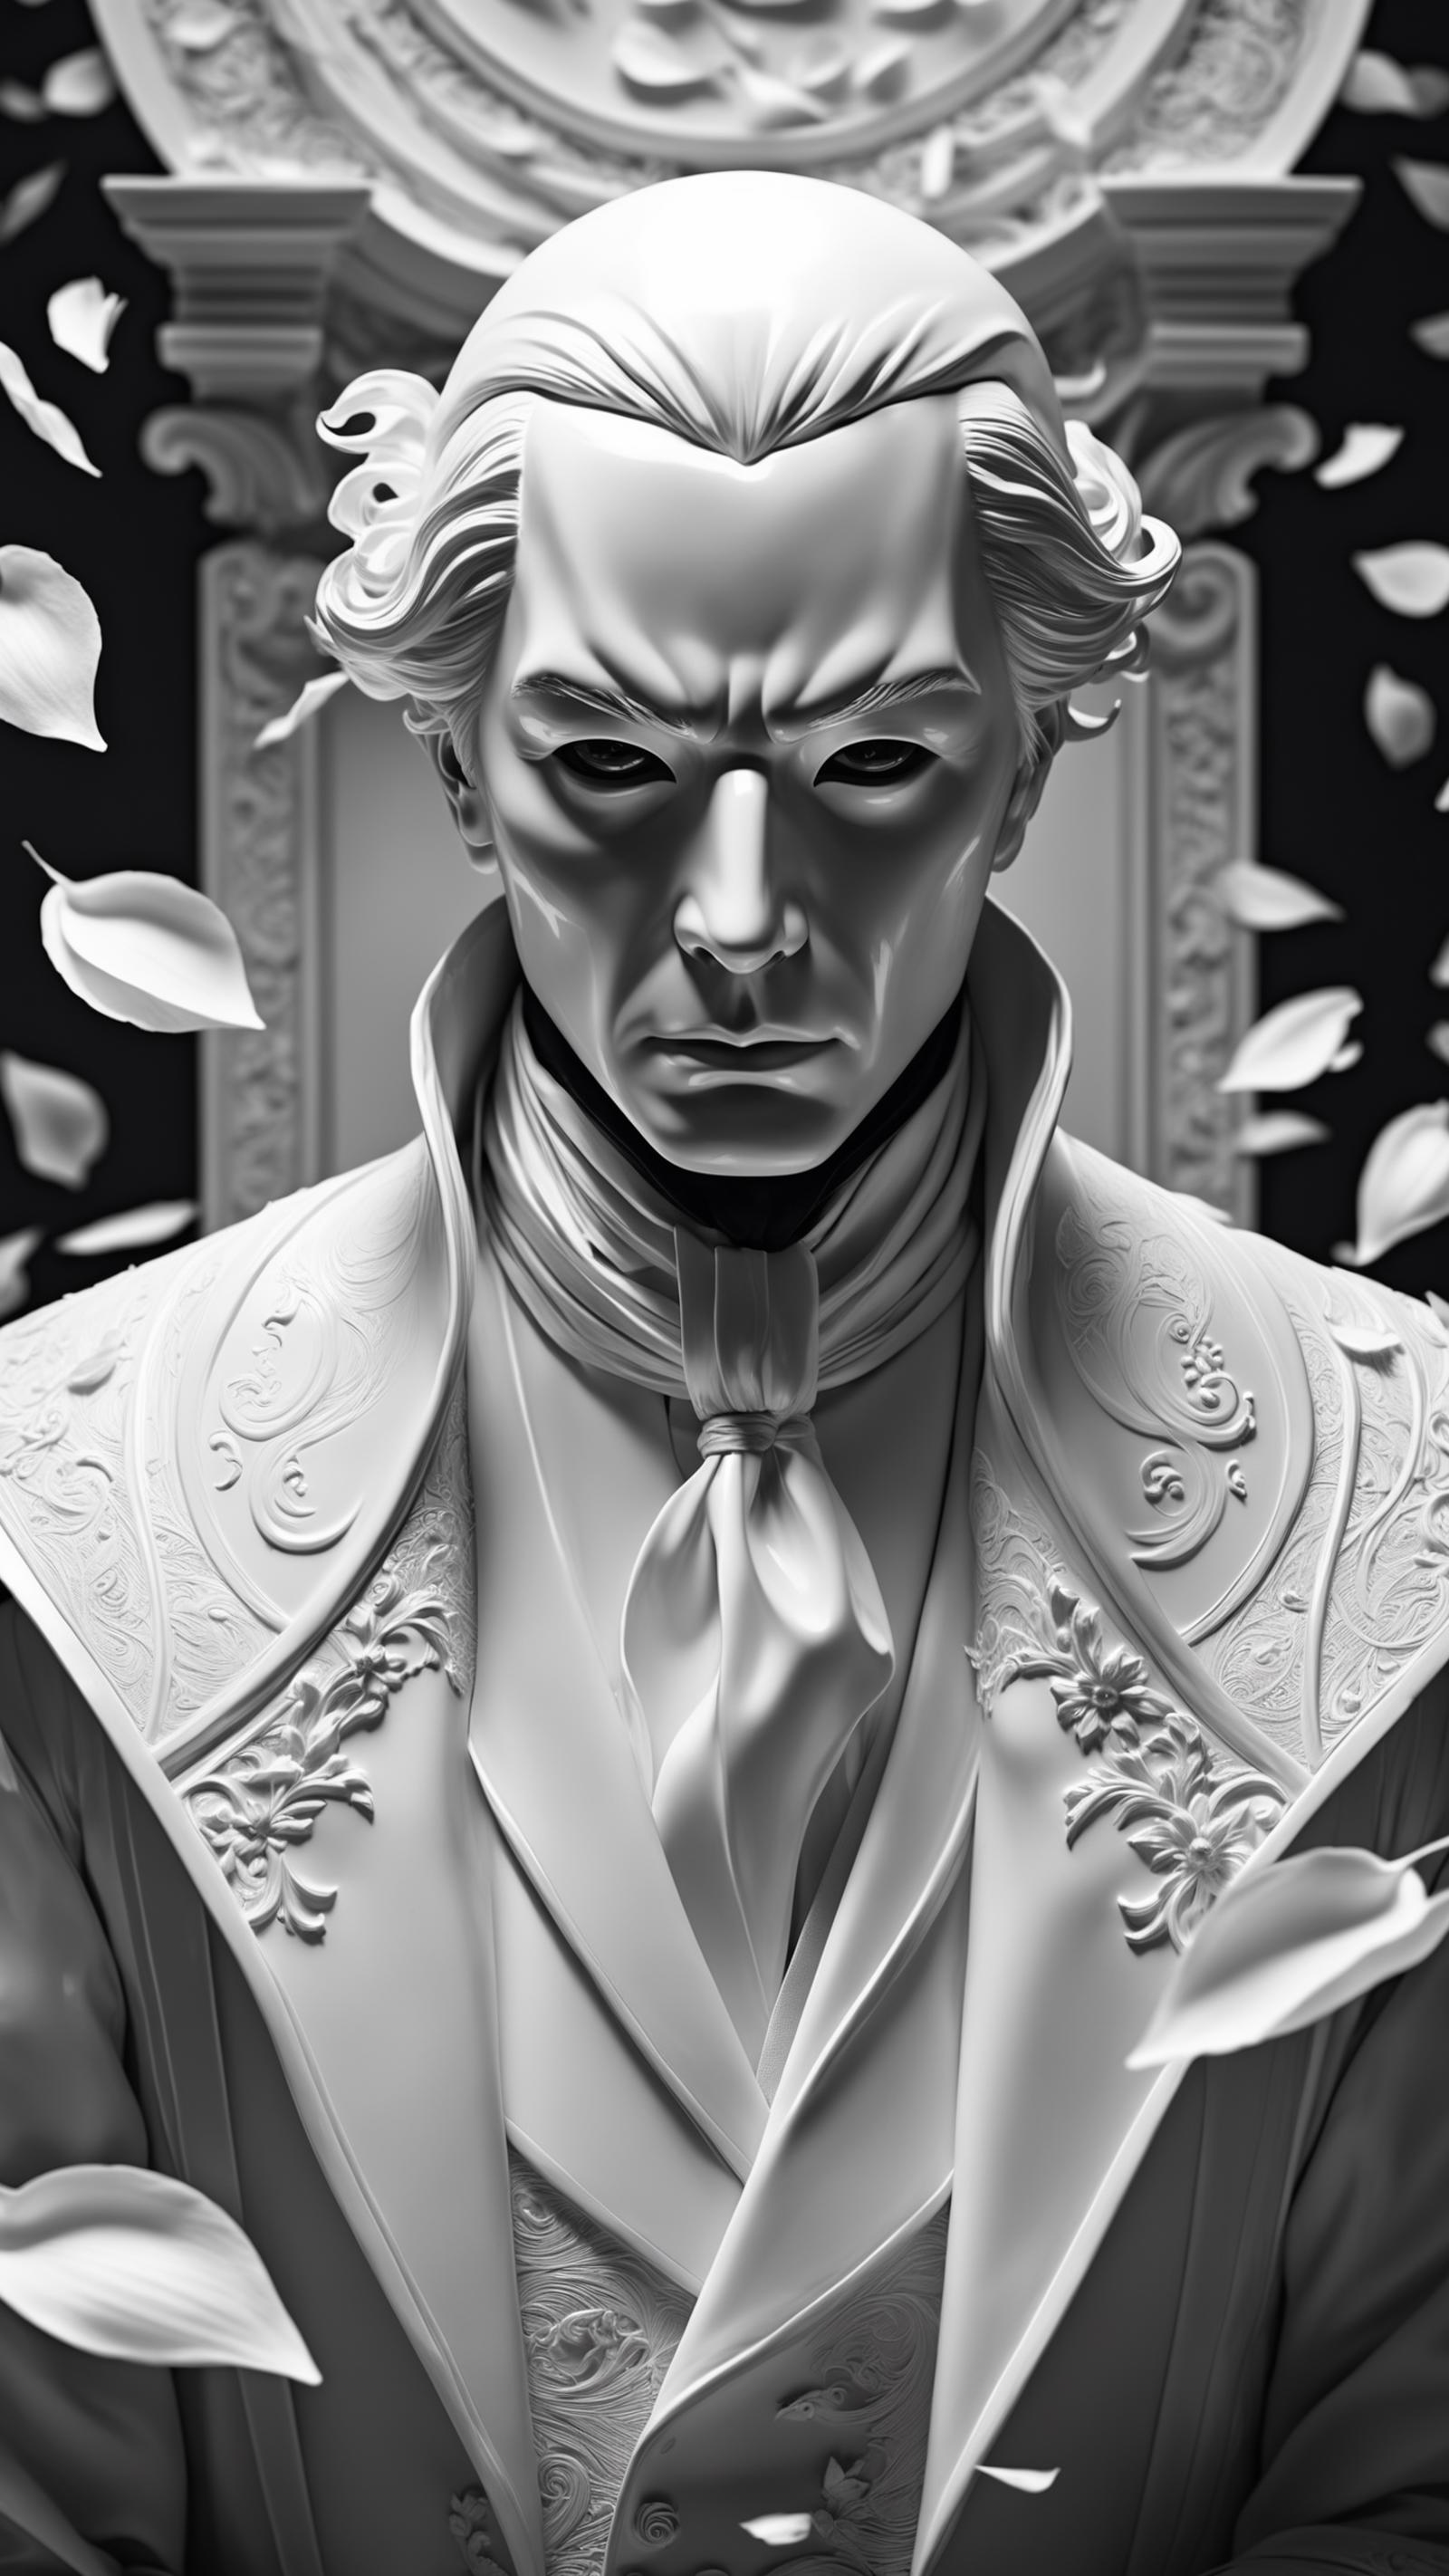 White Sculpture of a Man with a Scowl, Wearing a White Suit with a Tie and a White Cloak.